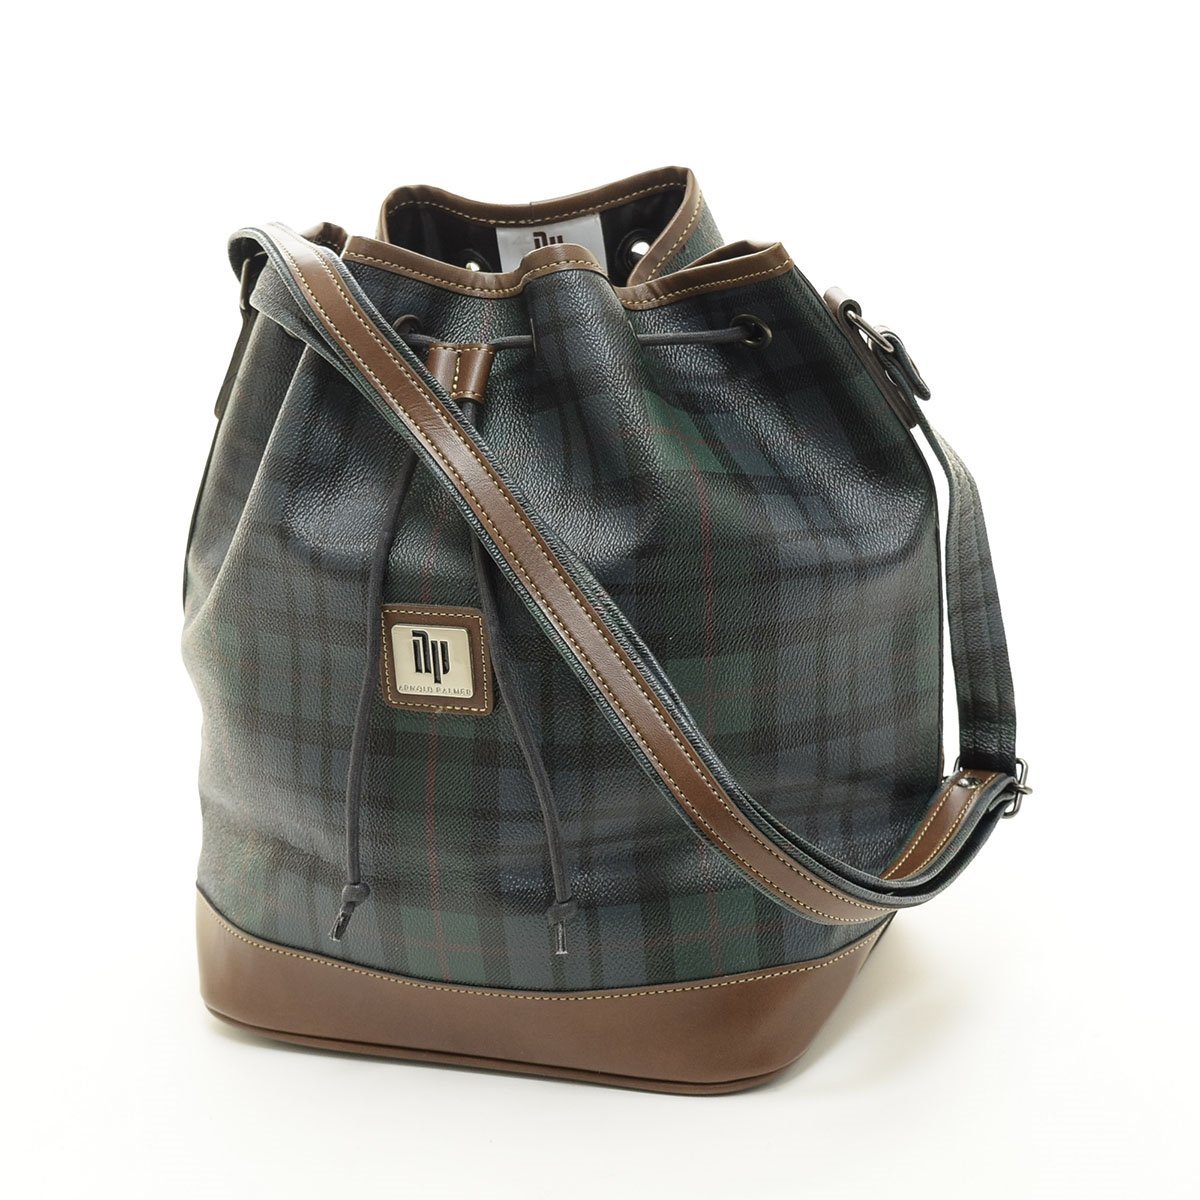 *505495 Arnold Palmer Arnold Palmer shoulder bag tartan check PVC pouch bag ACE company manufactured lady's green Brown 